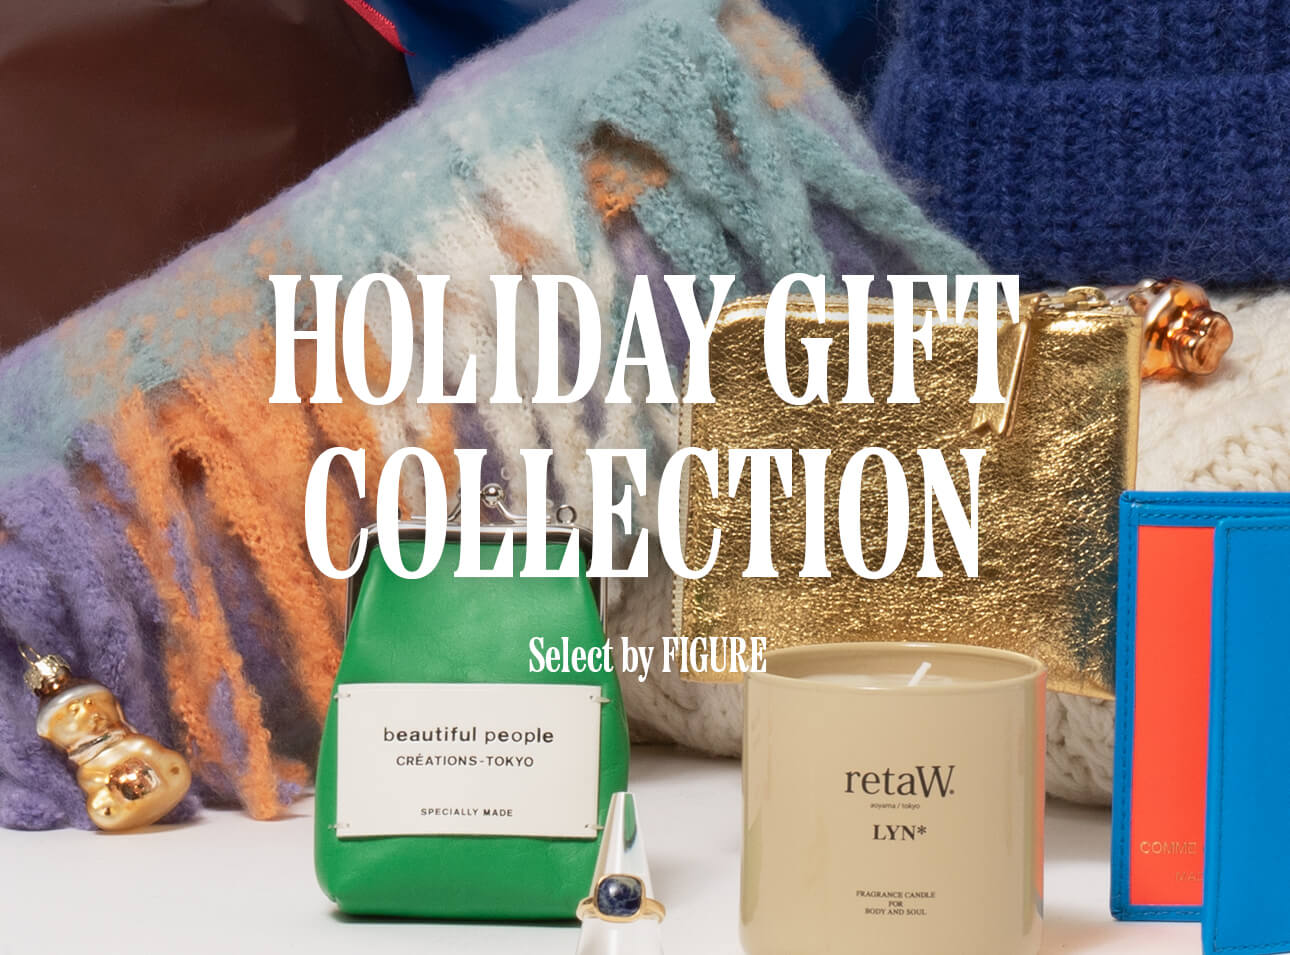 HOLIDAY GIFT COLLECTION